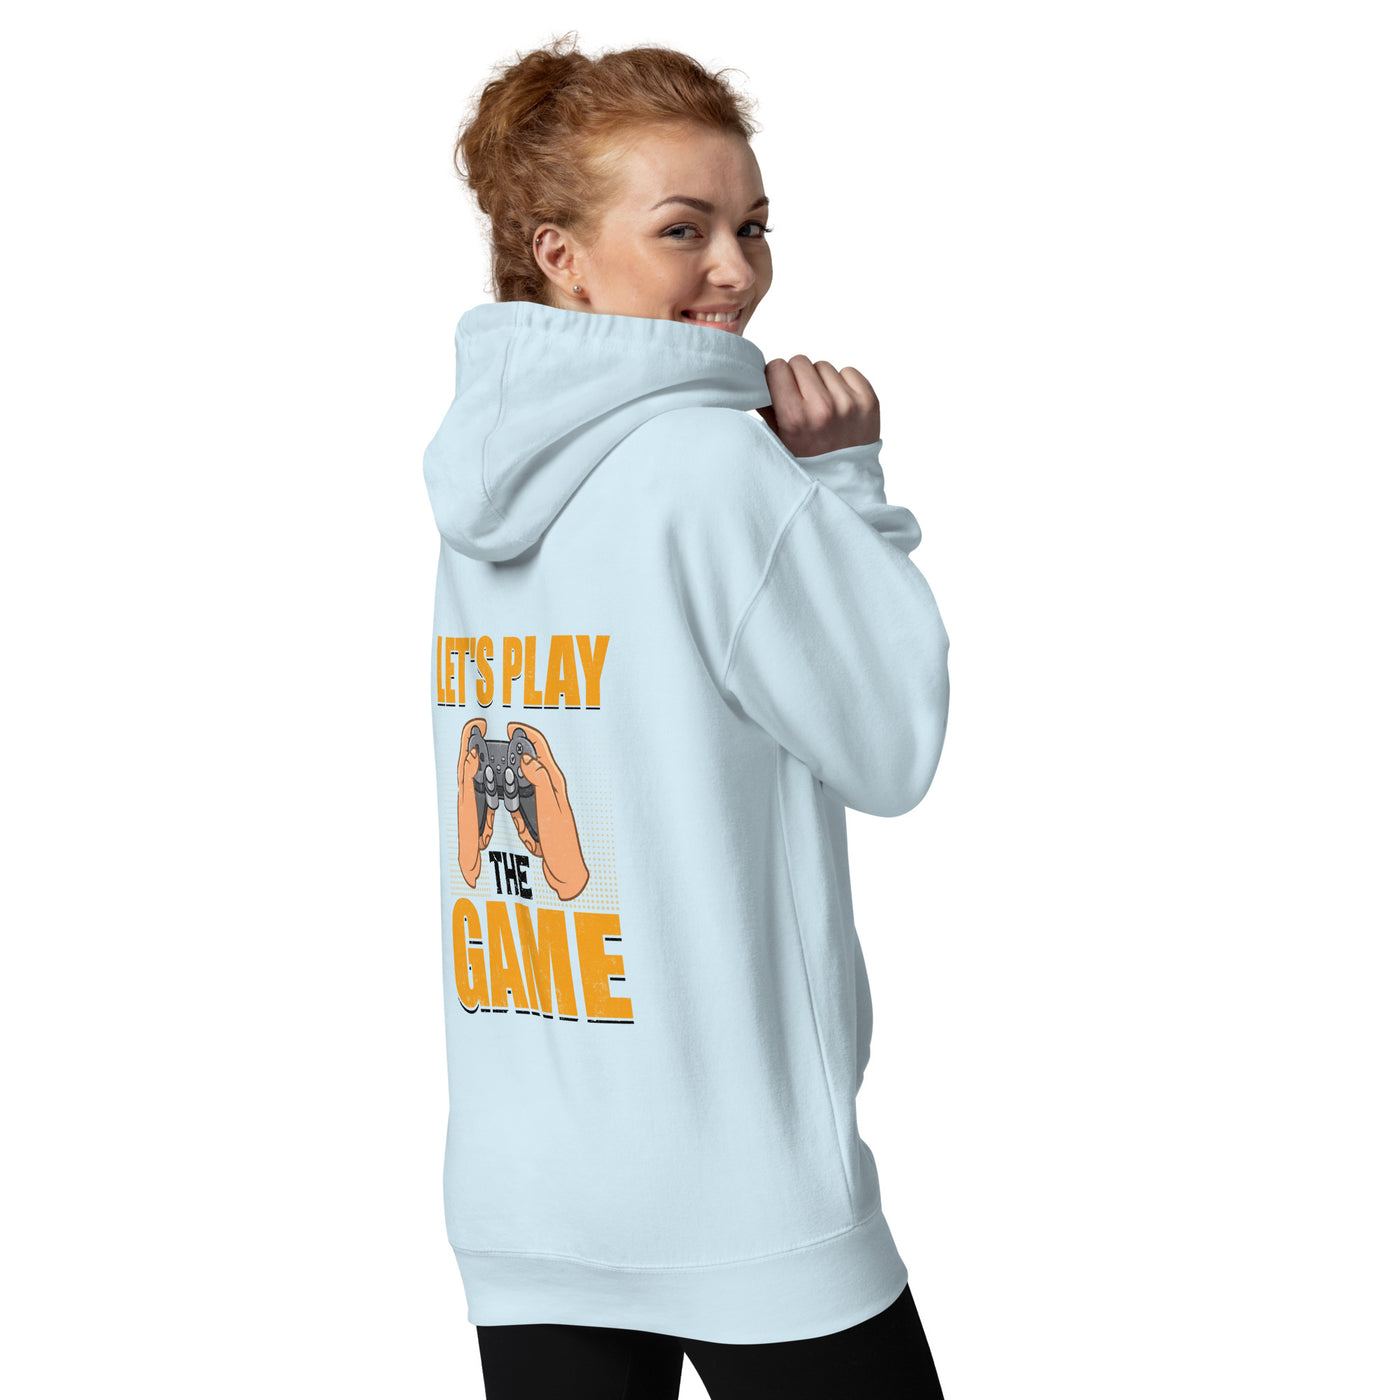 Let's Play the Game in Dark Text - Unisex Hoodie ( Back Print )